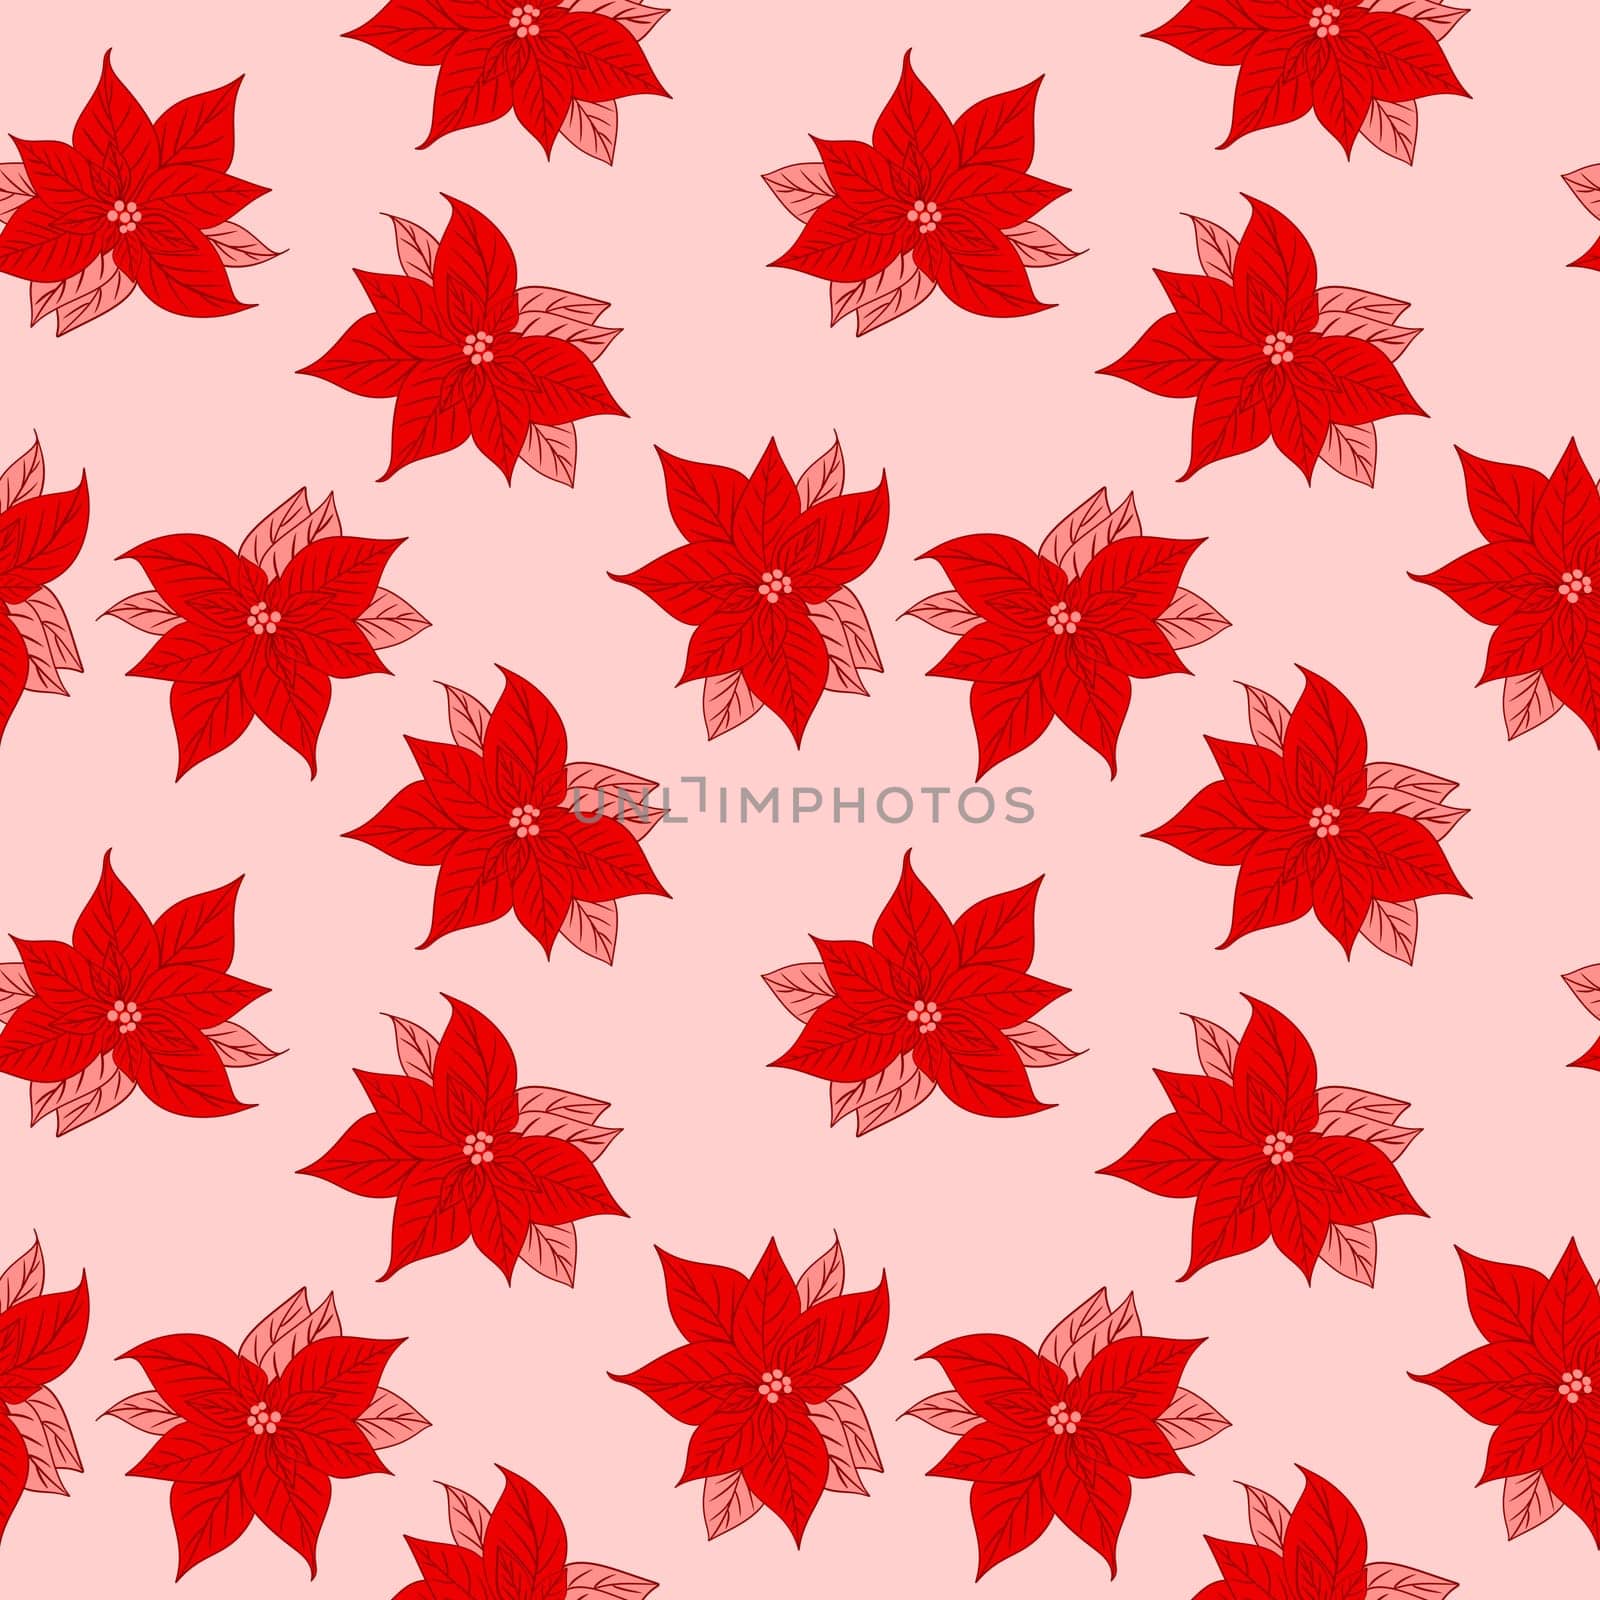 Seamless hand drawn pattern with pink red poinsettia Christmas star flowers winter floral print, red pink crimson vermilion on white background, for new year wrapping paper textile botanical decor art. by Lagmar